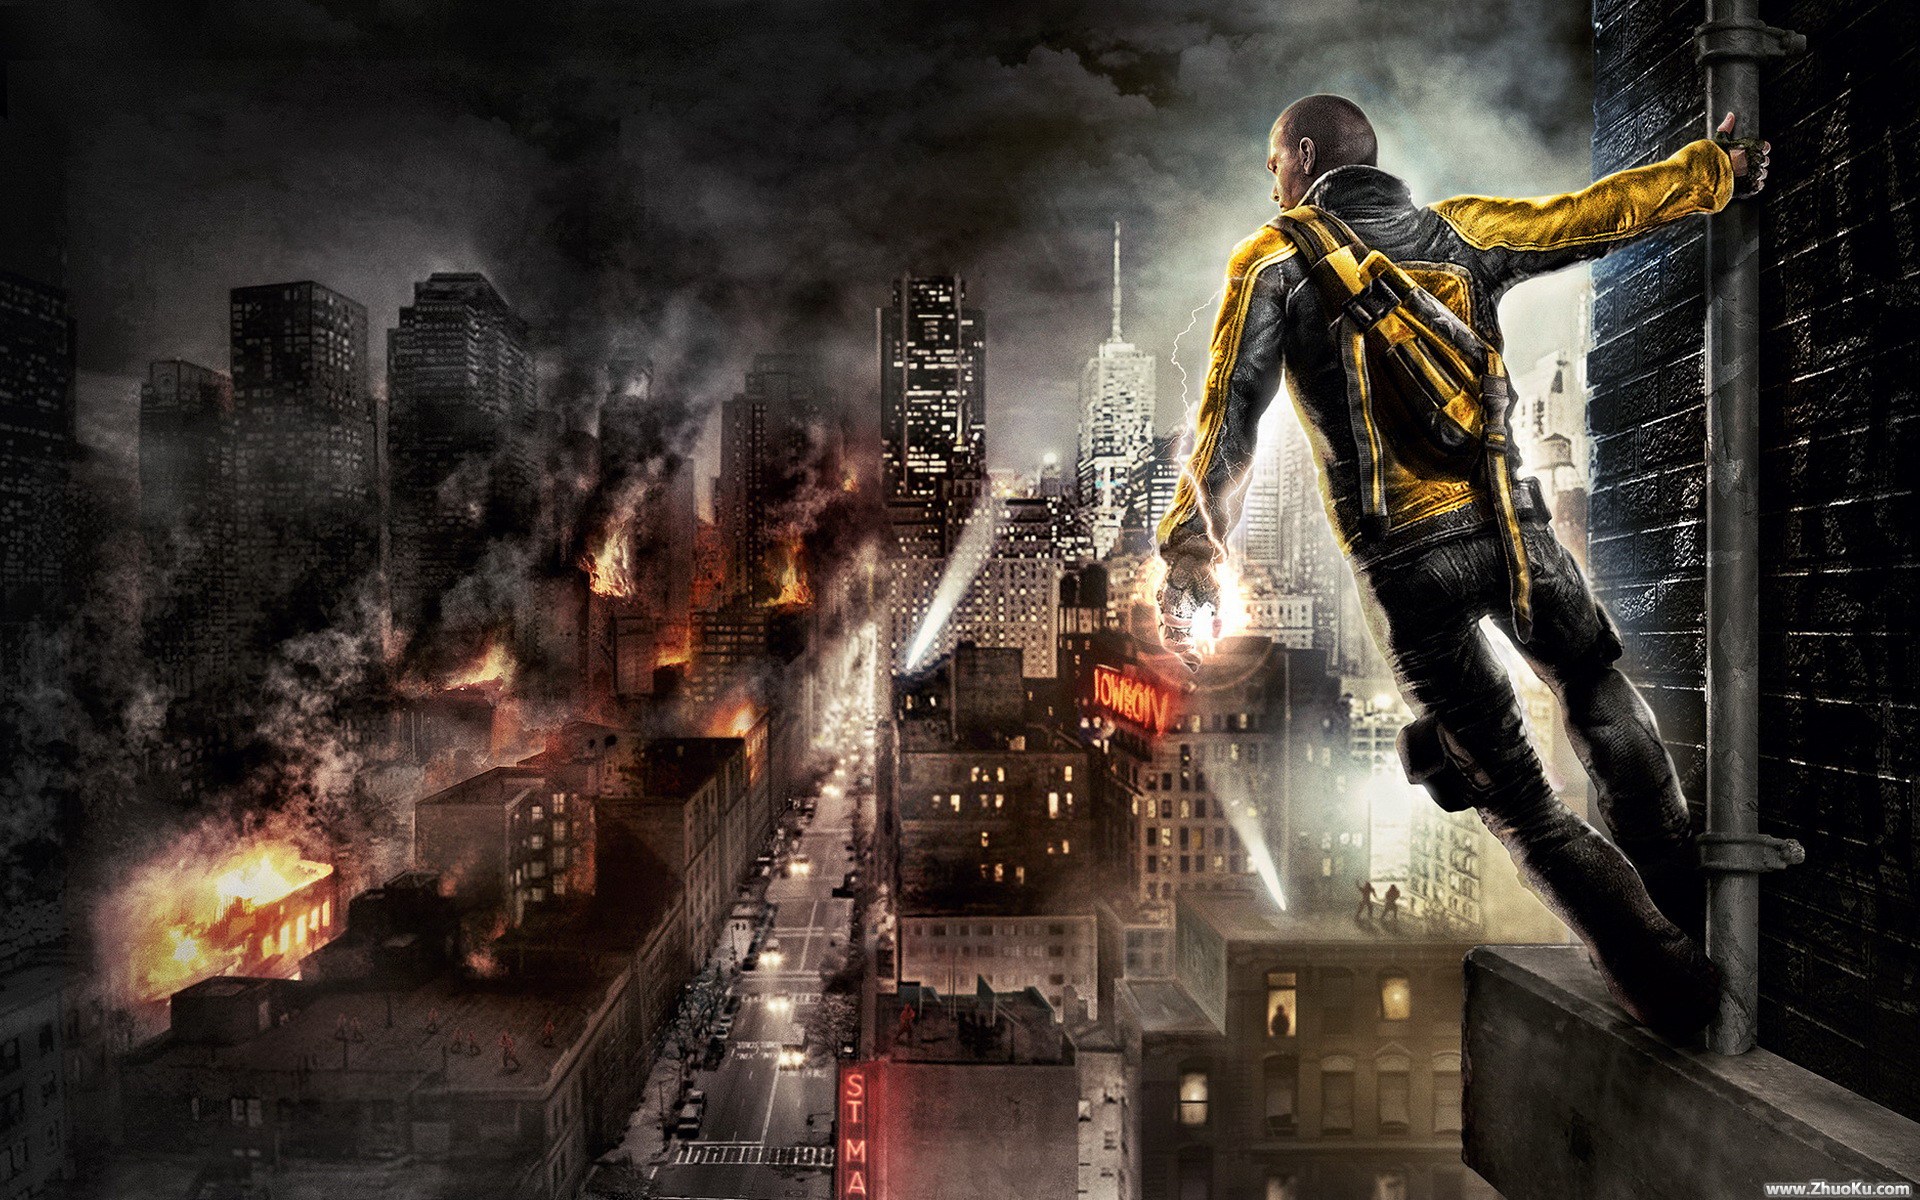 video game Infamous wallpaper video game Infamous picture